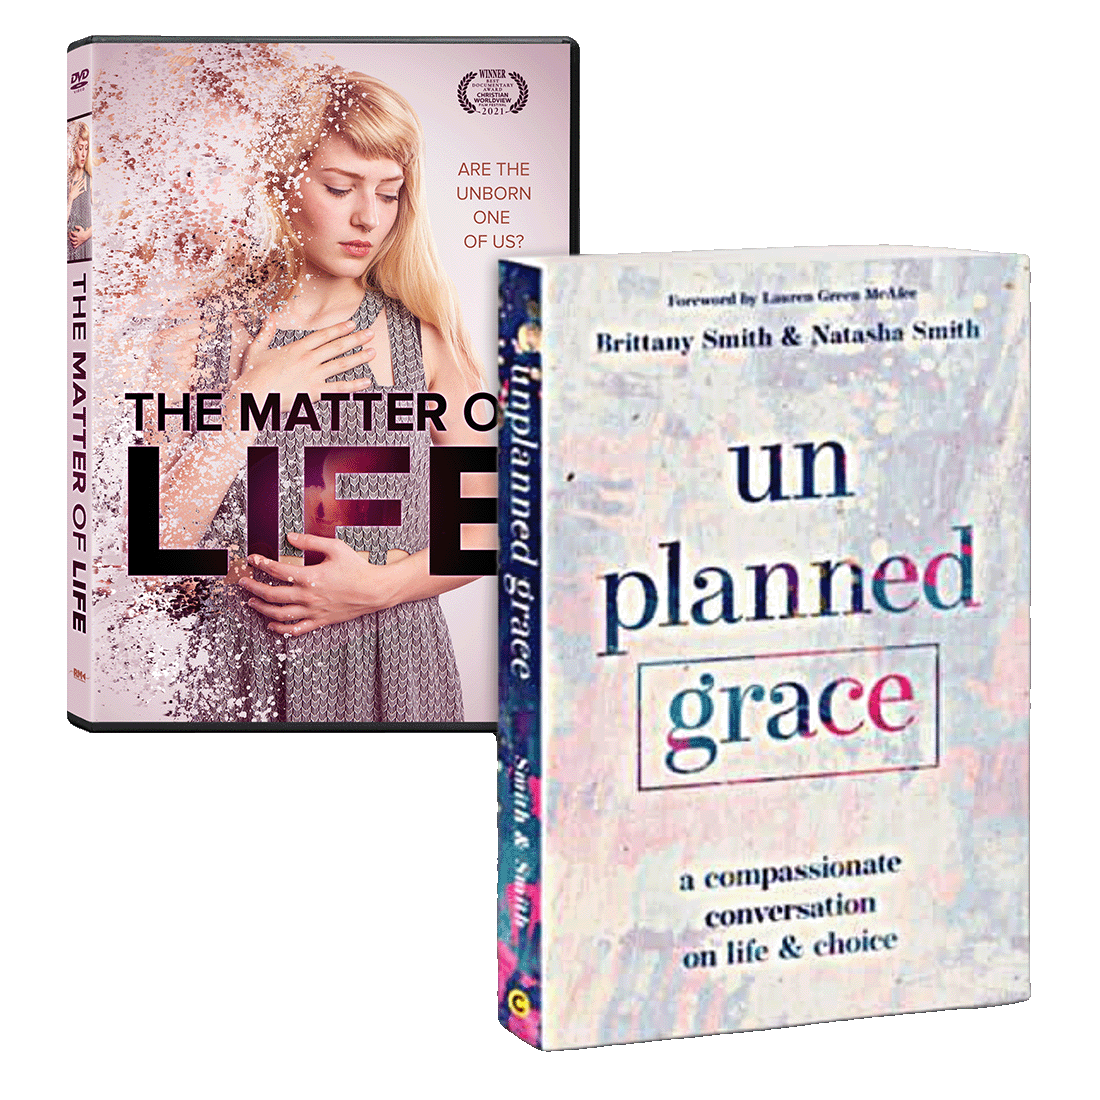 The Matter of Life DVD and Unplanned Grace book